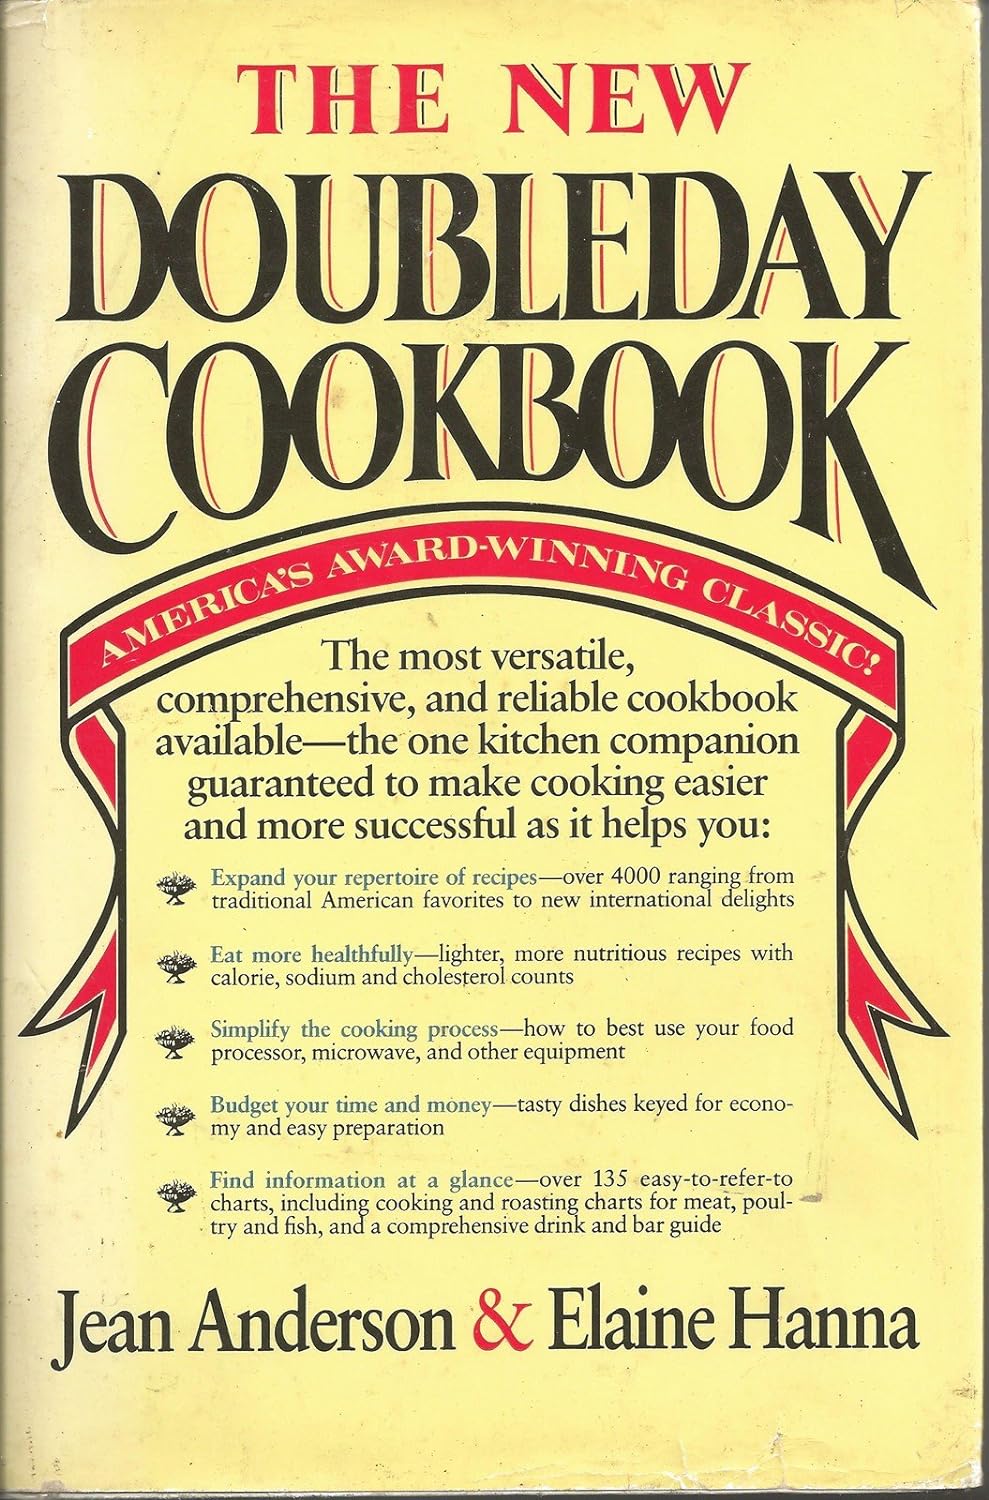 The New Doubleday Cookbook Complete Contemporary Cooking Volume 2 by Jean Anderson